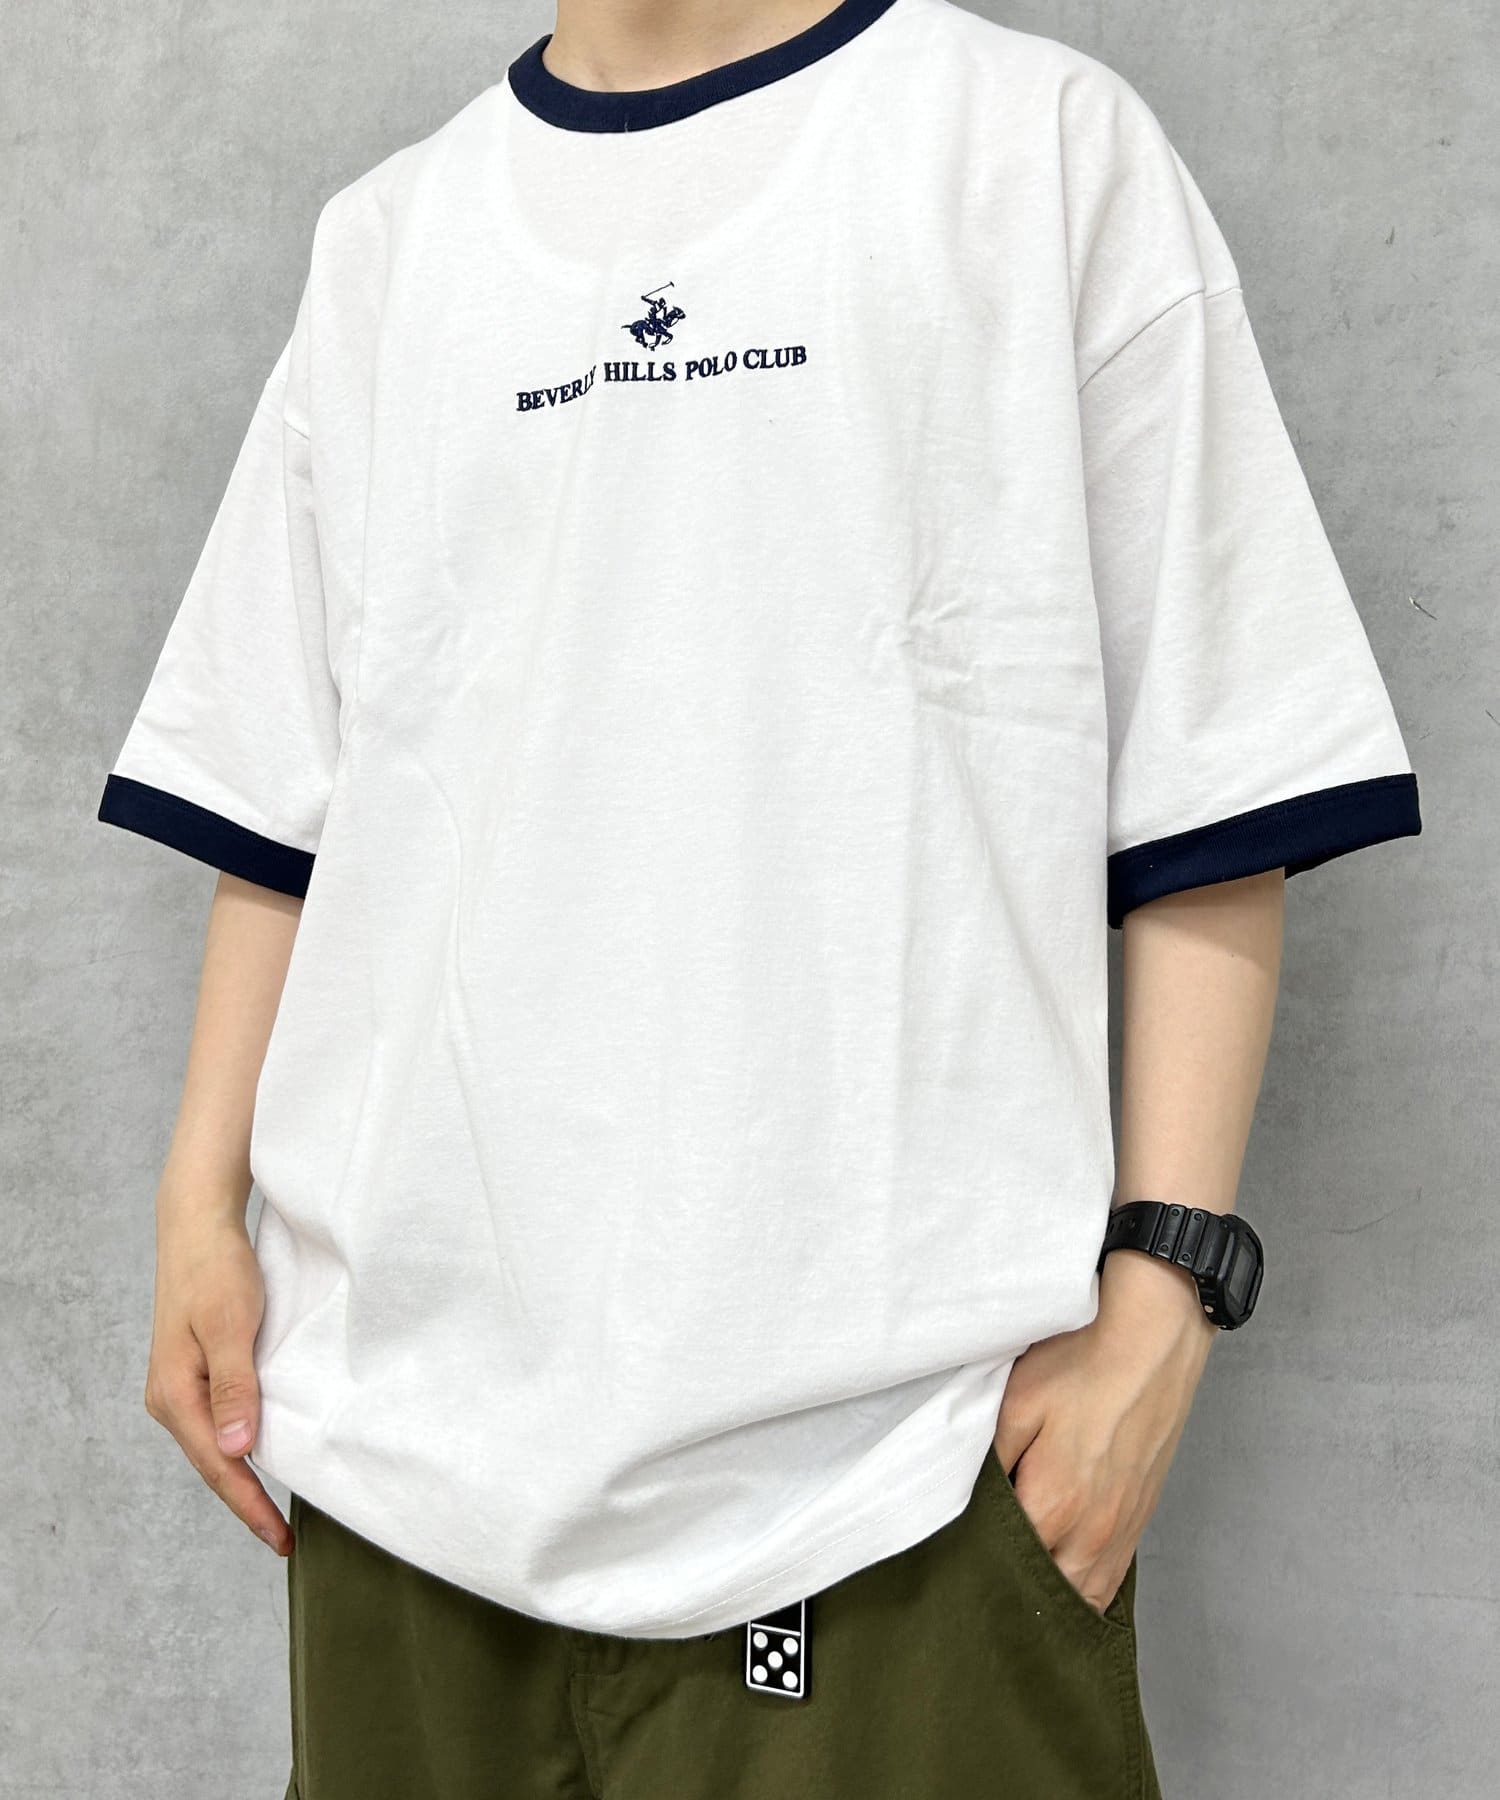 WHO’S WHO gallery(フーズフーギャラリー) BEVERLY HILLS POLO CLUB  BIG TEE